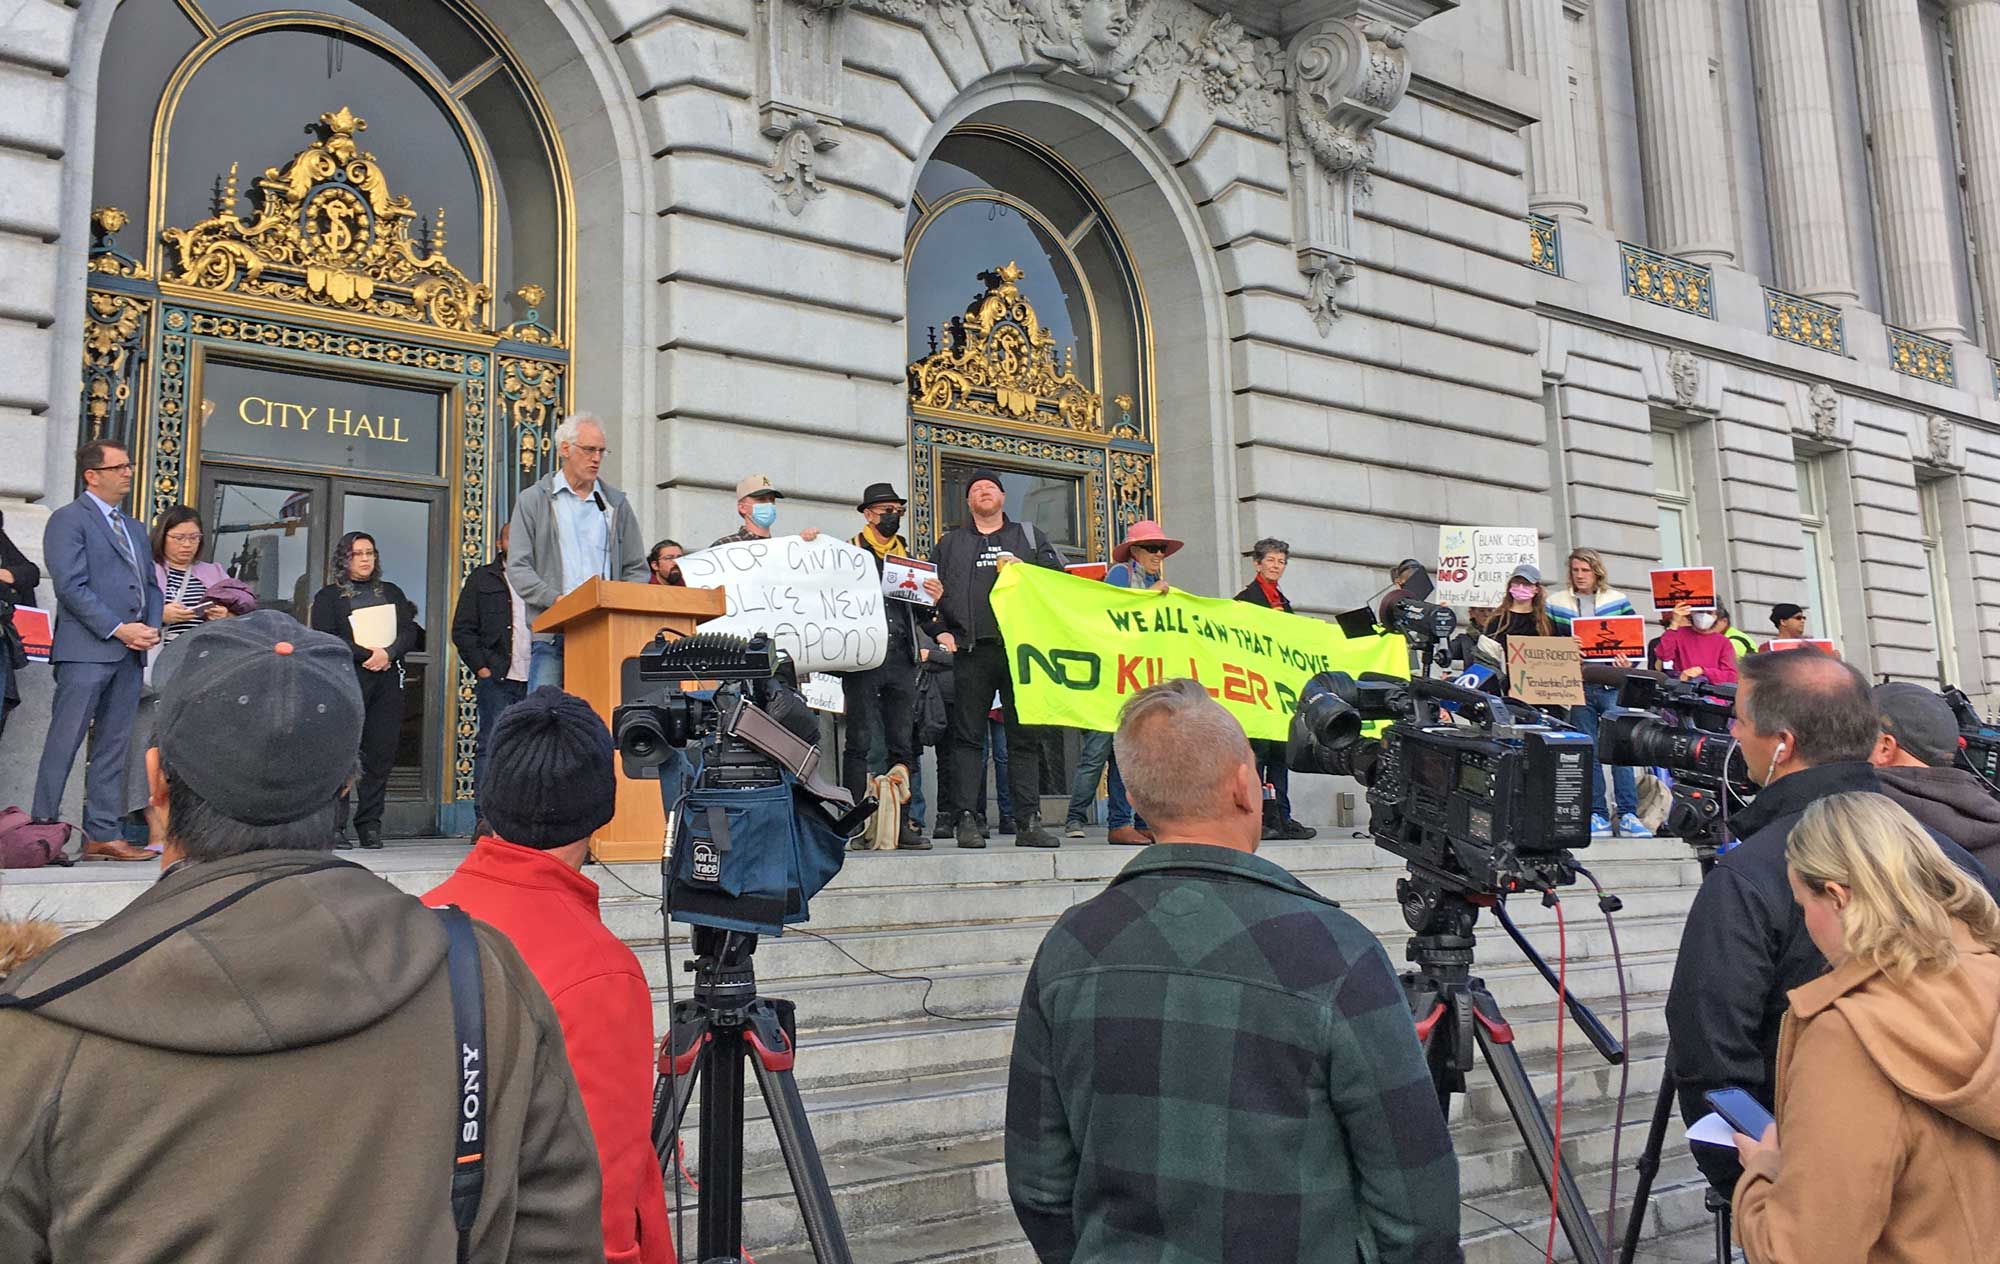 An organizer addresses a press conference from the steps of San Francisco City hall, concerning police use of killer robots